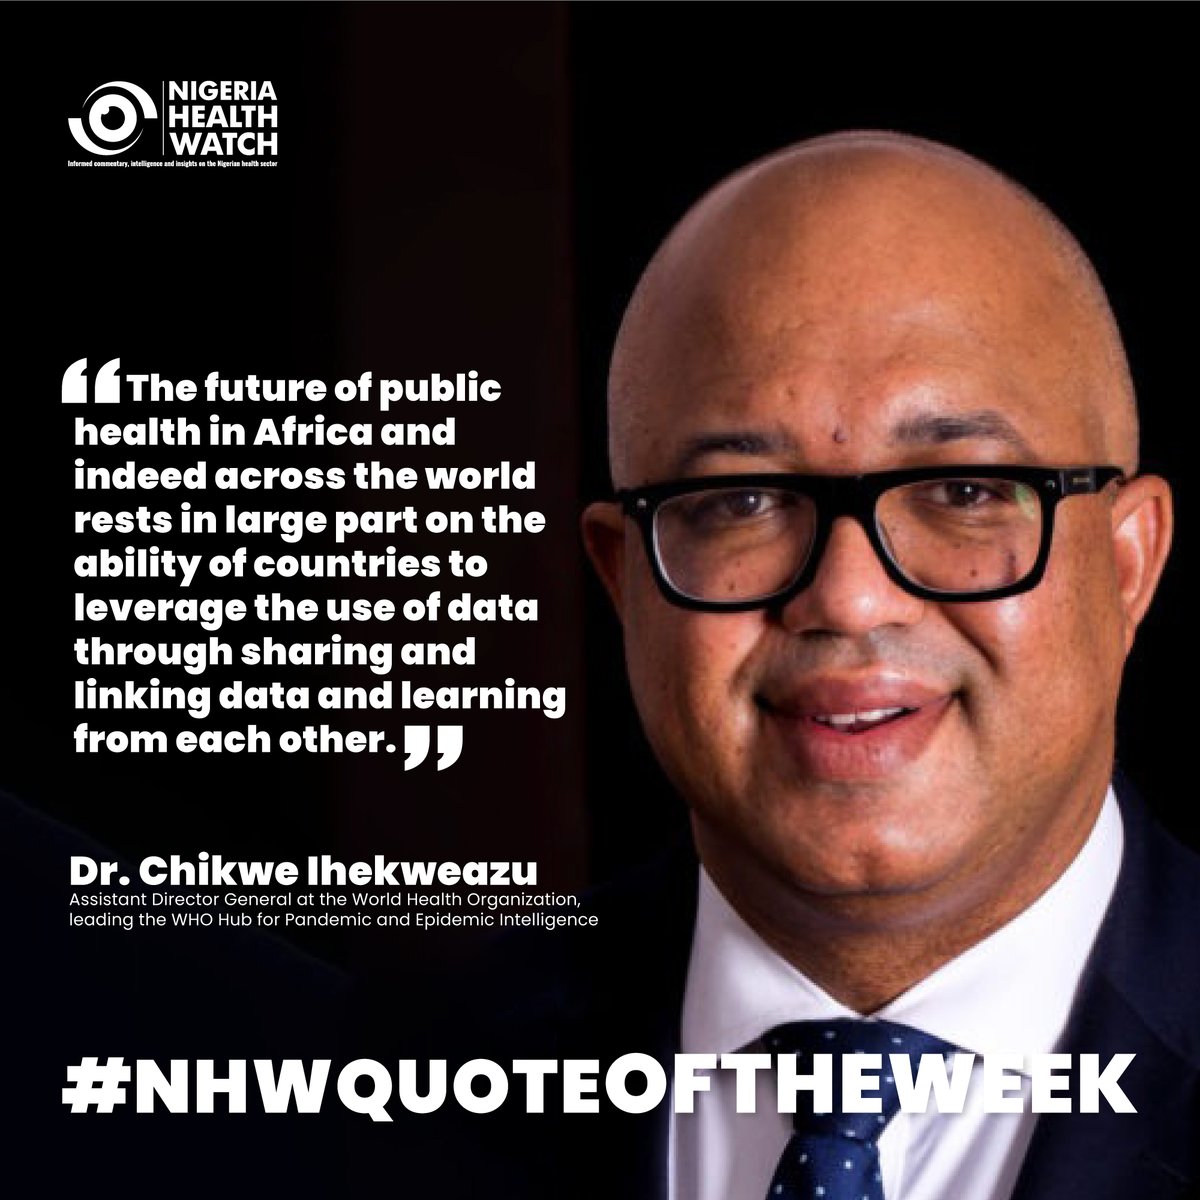 #NHWQUOTEOFTHEWEEK 

Given the increasing dangers & complexities of disease outbreaks globally, strengthening countries' capacity for improved health surveillance & data sharing is critical to building a resilient health system capable of responding to public health emergencies.